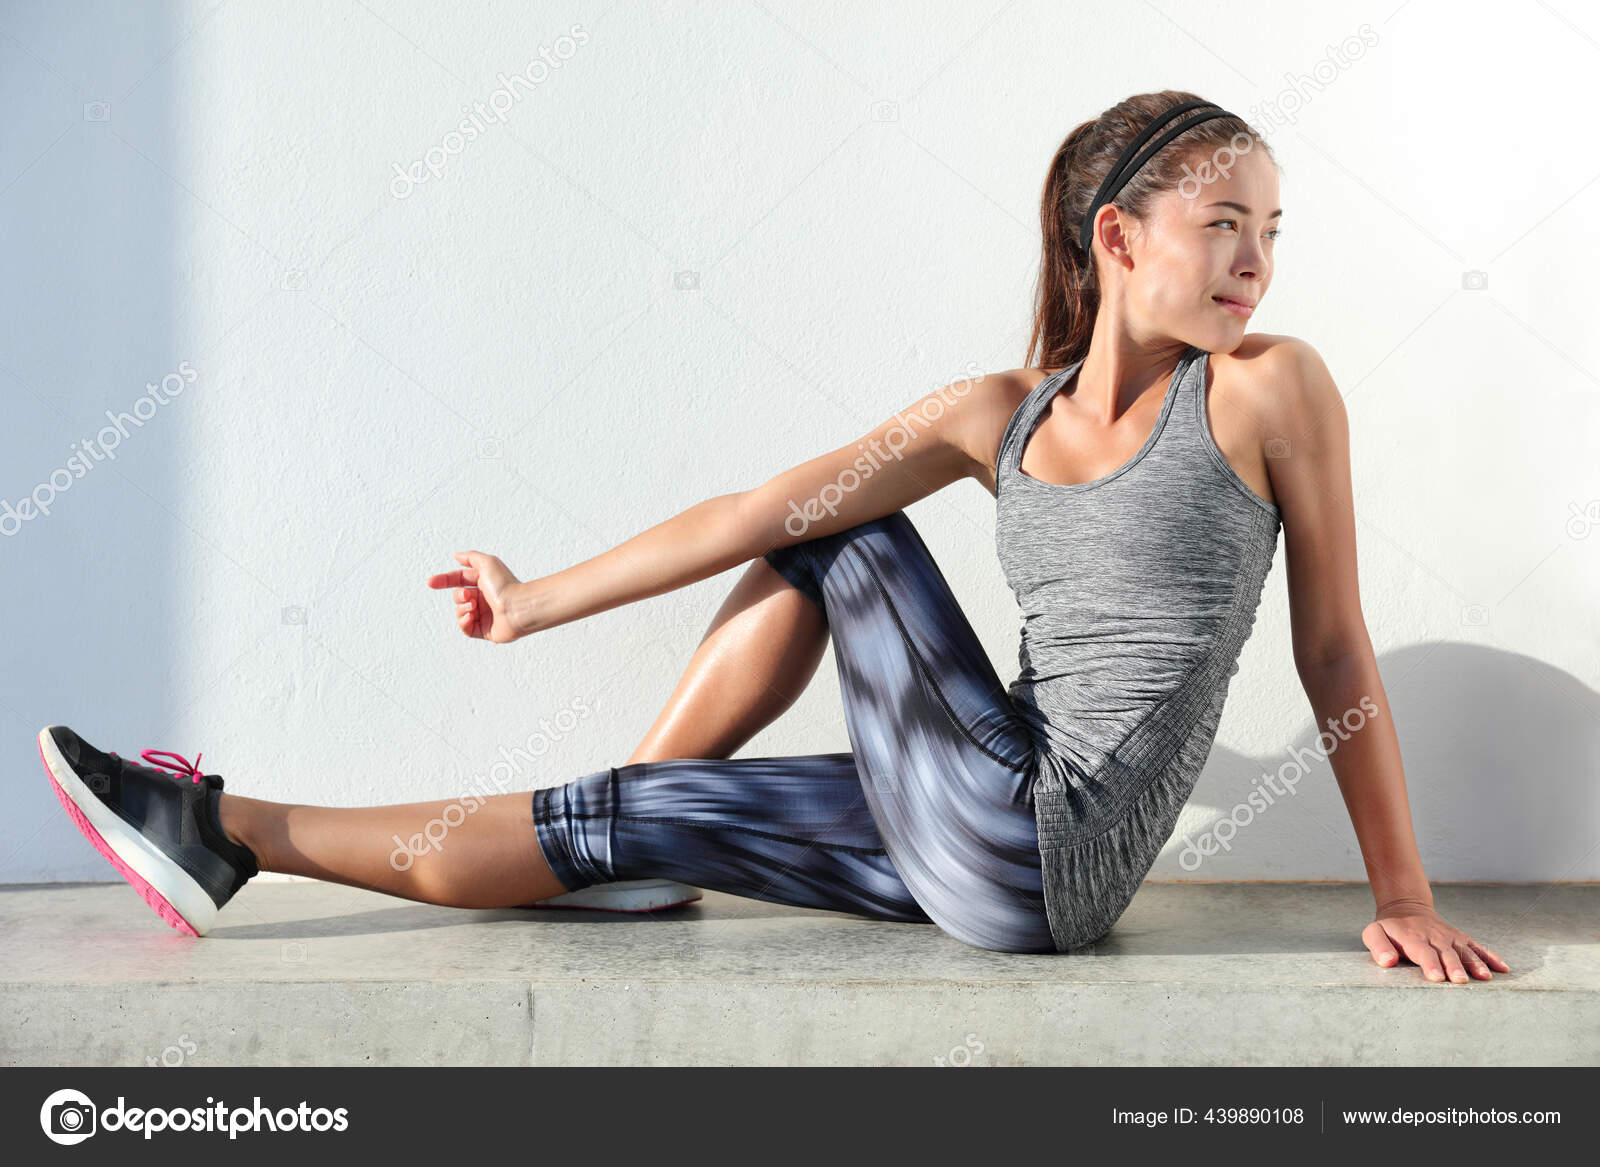 Fitness woman stretching legs doing pilates leg stretches